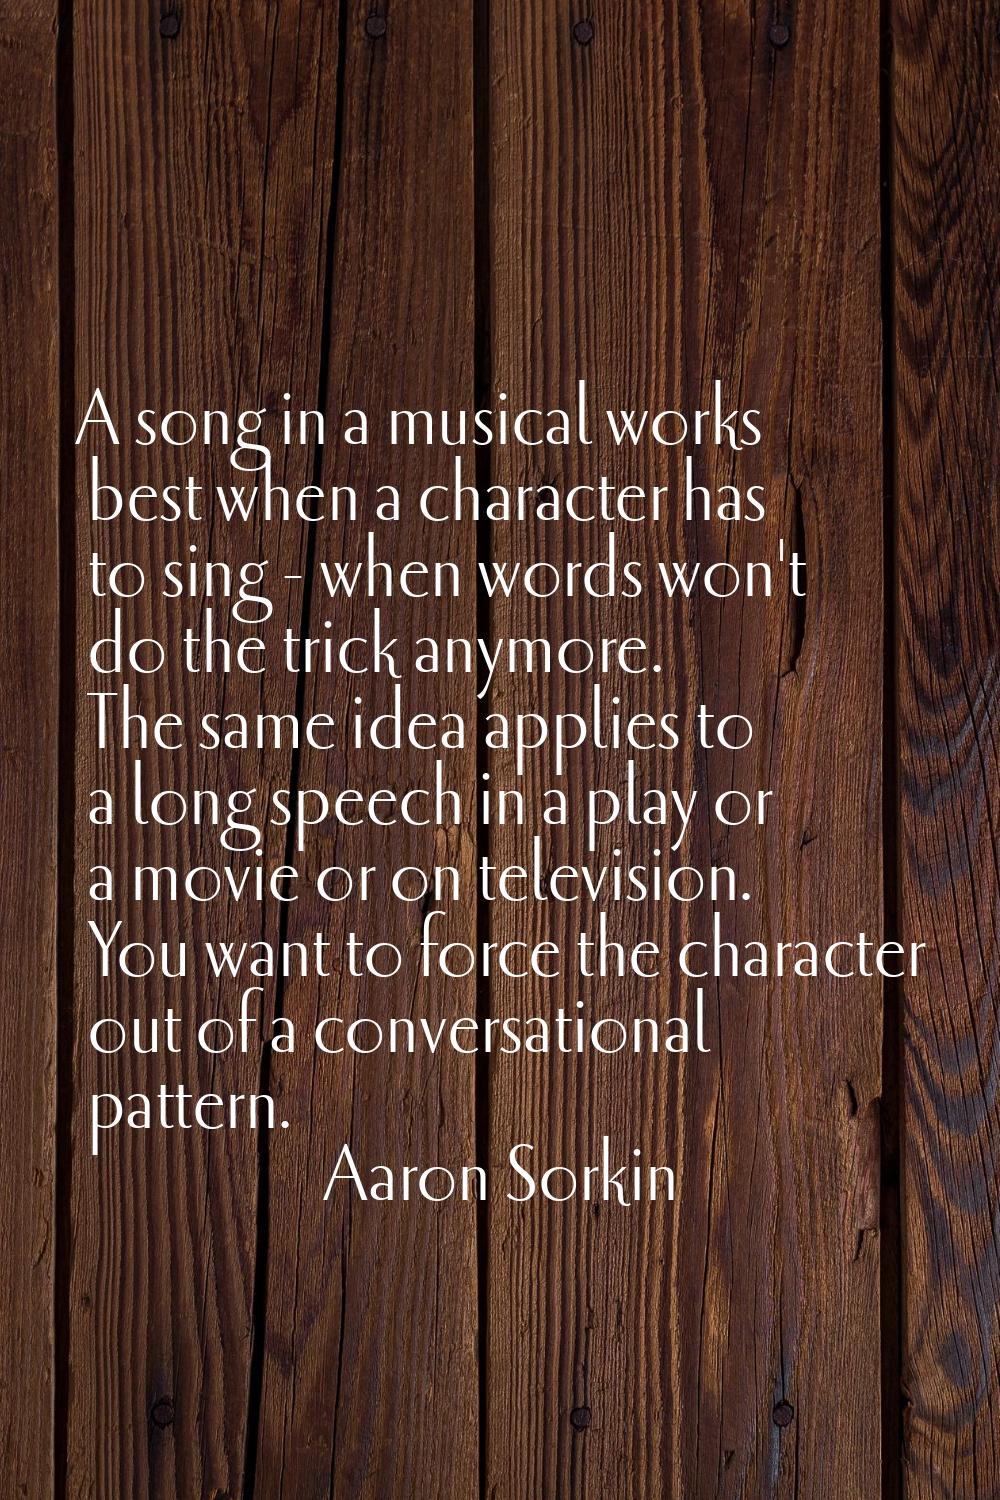 A song in a musical works best when a character has to sing - when words won't do the trick anymore